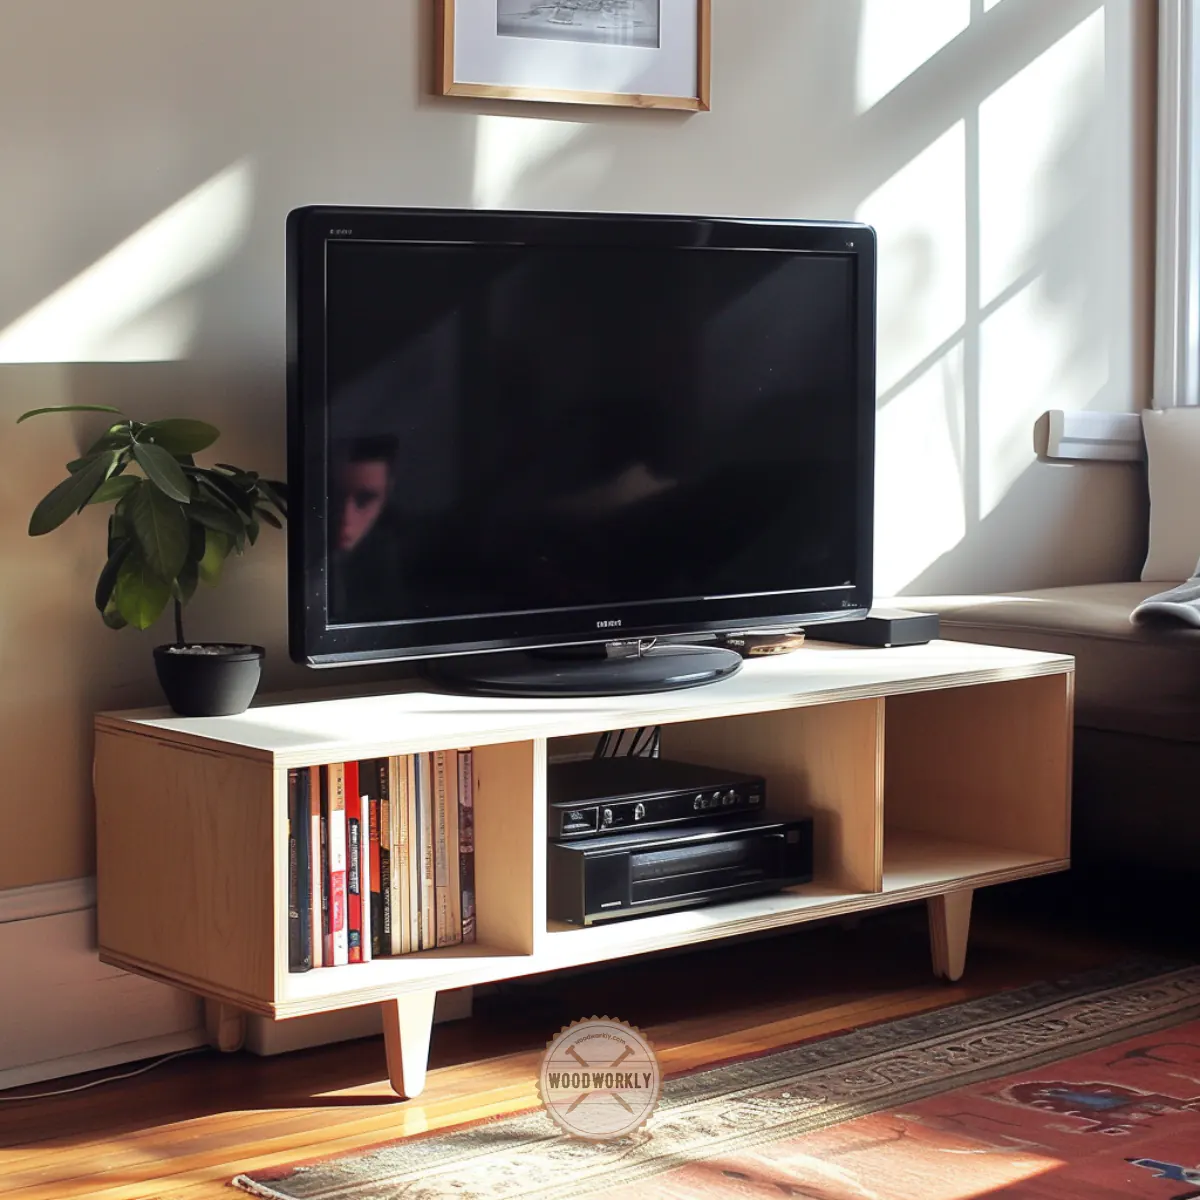 Plywood Tv stand